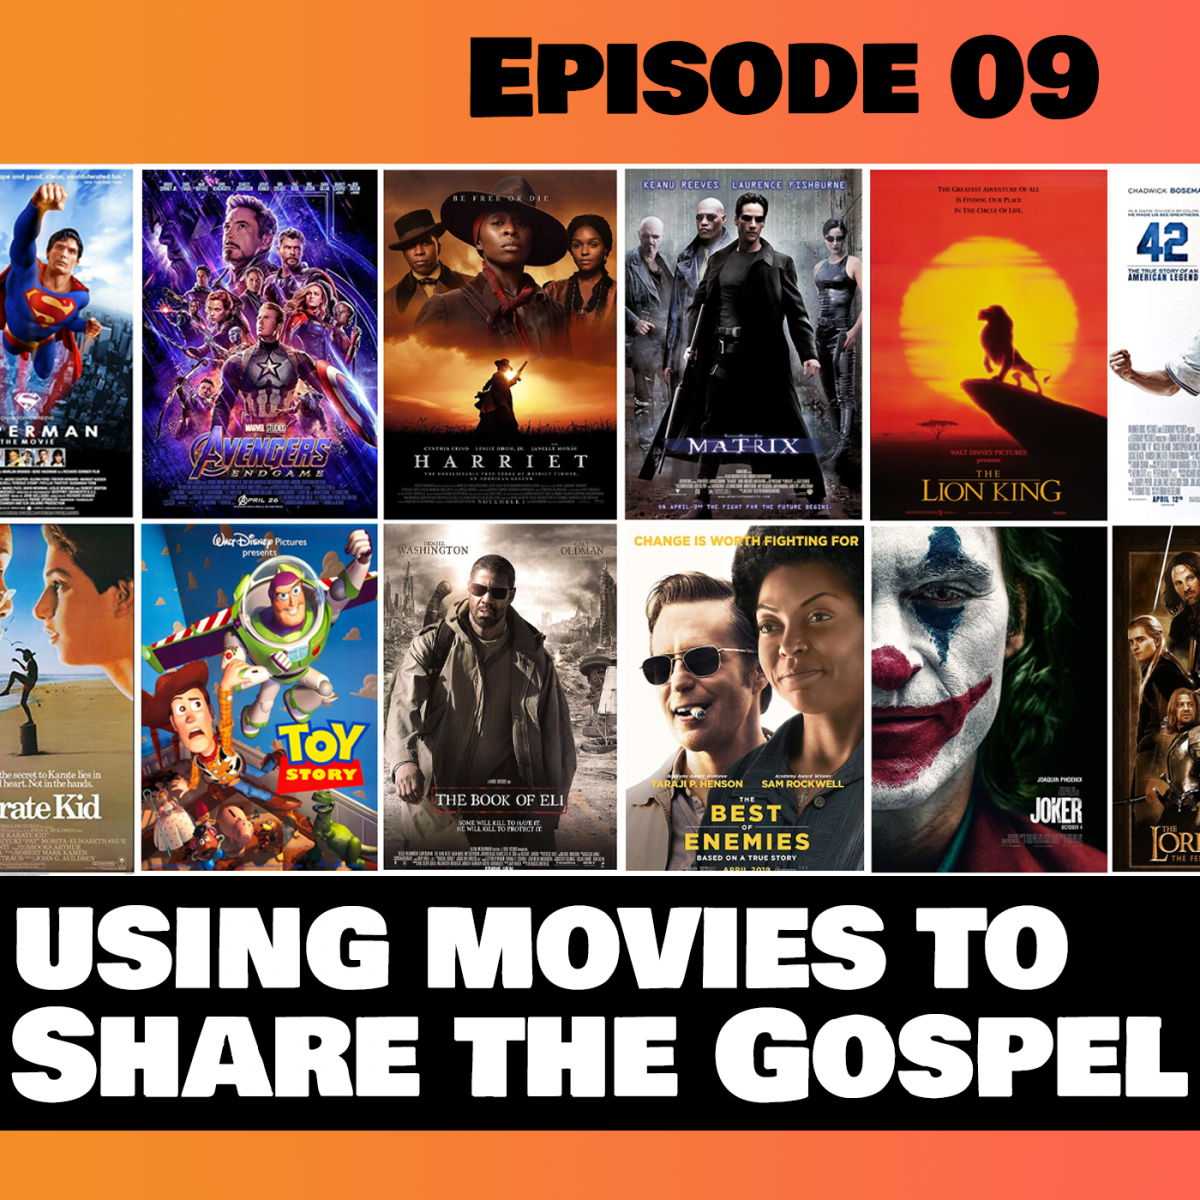 Using Movies to Share the Gospel